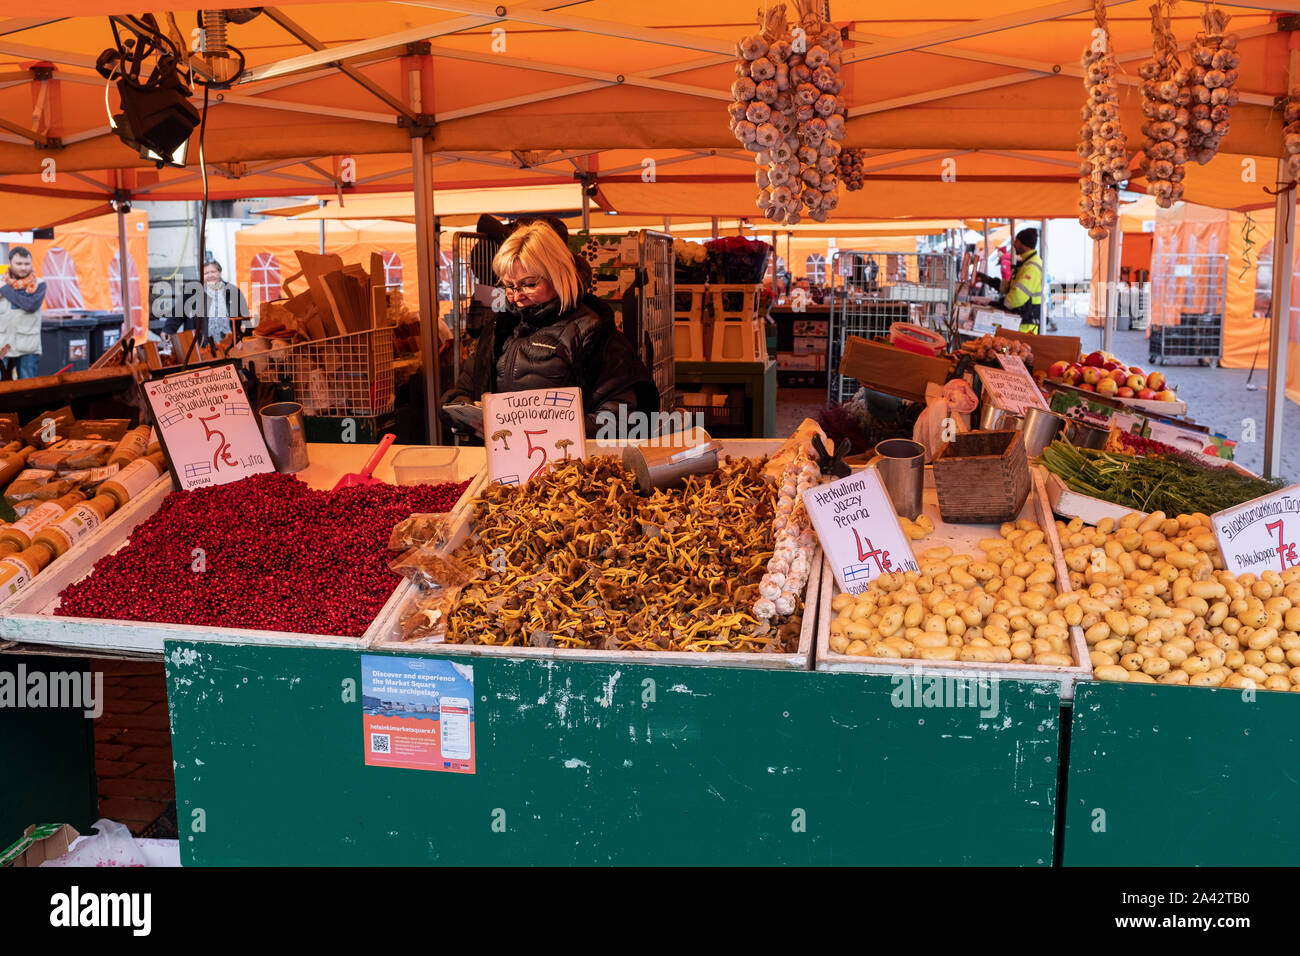 Lingonberries and chanterelle mushrooms on a market stall, Market Square, Helsinki, Finland Stock Photo